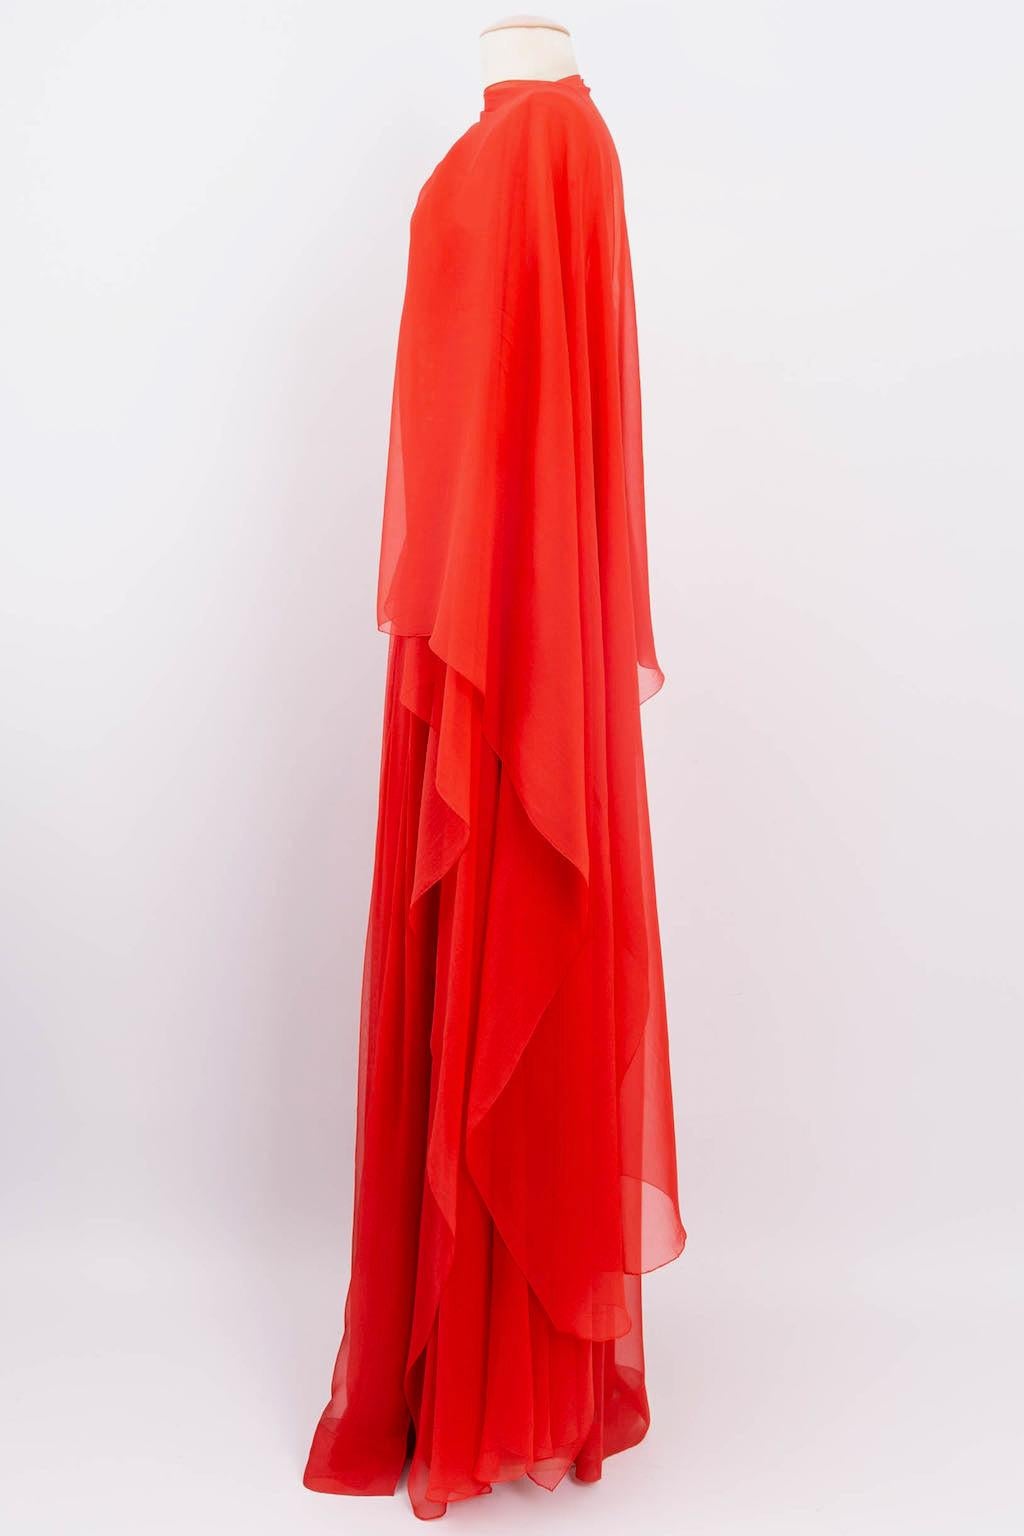 Givenchy Haute Couture (Made in France) Amazing dress composed of red silk chiffon embroidered with beads, cabochons, and sequins. It is accompanied by a long stole that can be tied around the neck. Ribbon N°66420. 
No composition or size tag, it